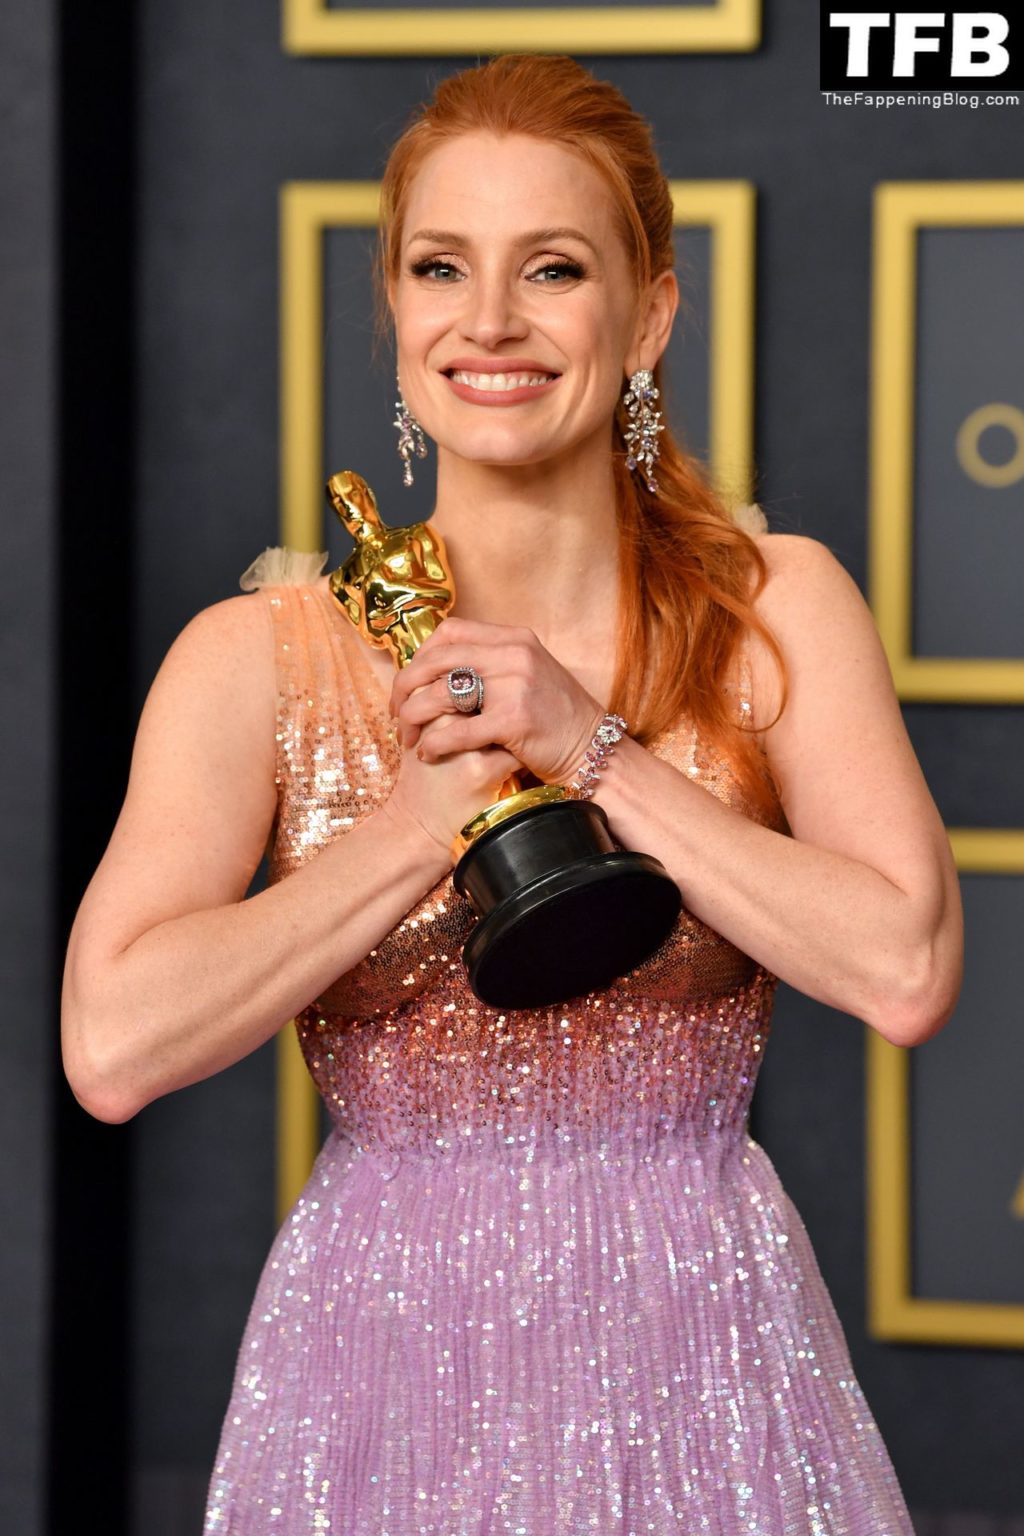 Jessica Chastain Sexy The Fappening Blog 29 2 1024x1536 - Jessica Chastain Poses With Her Oscar at the 94th Academy Awards (150 Photos)